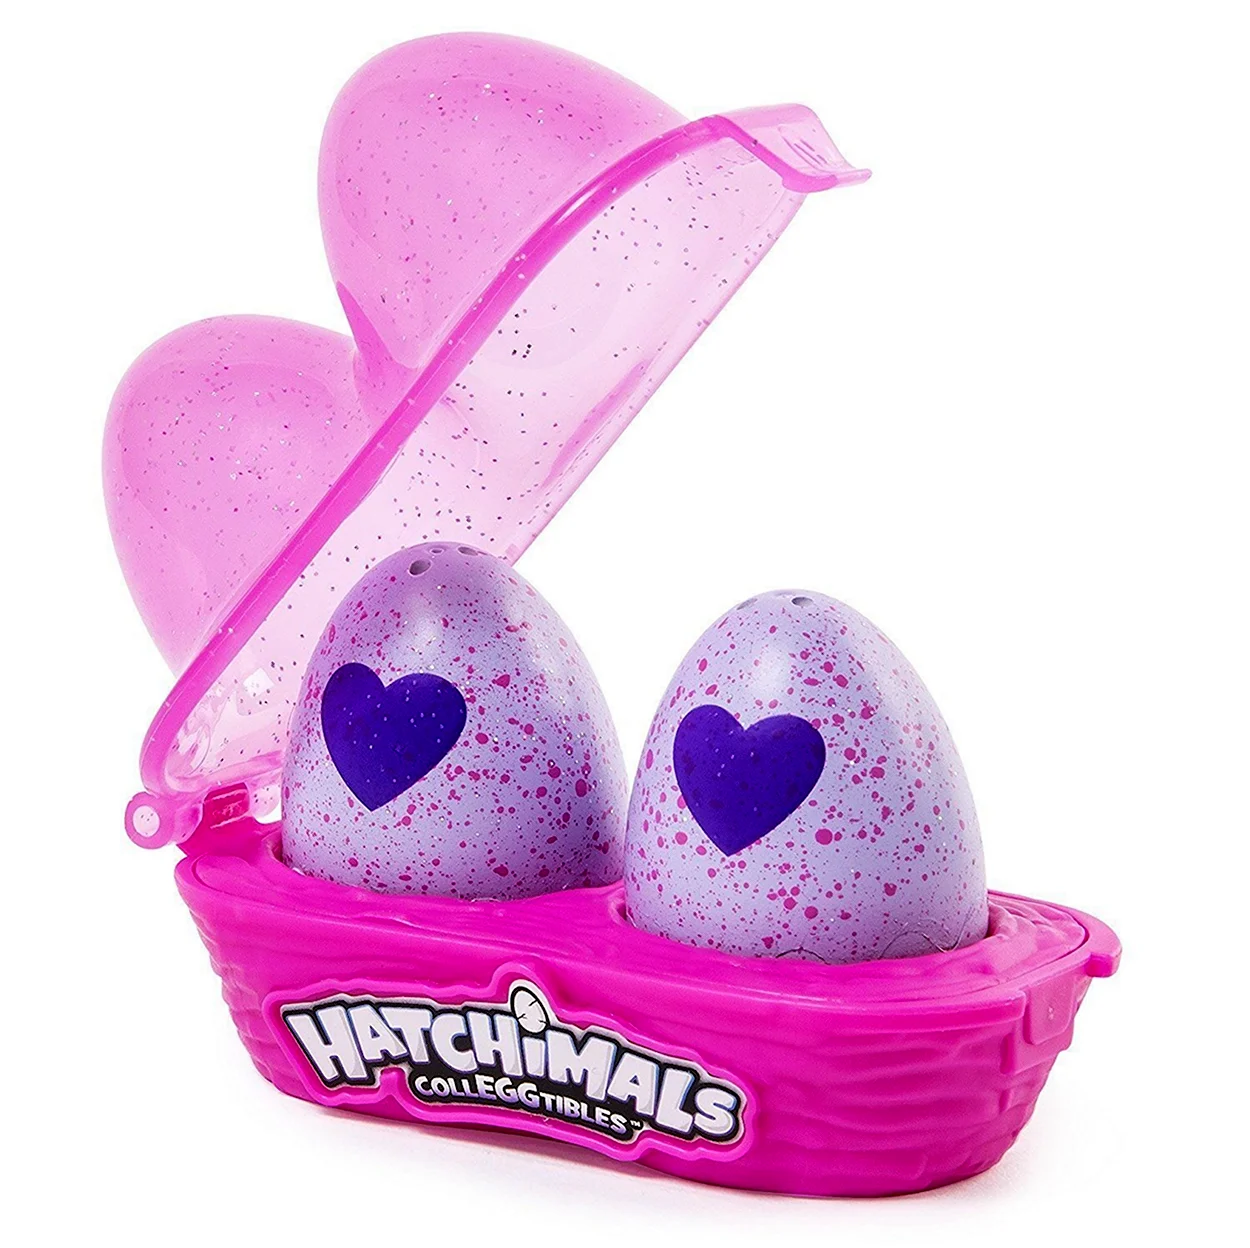 Spin Master Hatchimals Colleggtibles. Игрушка